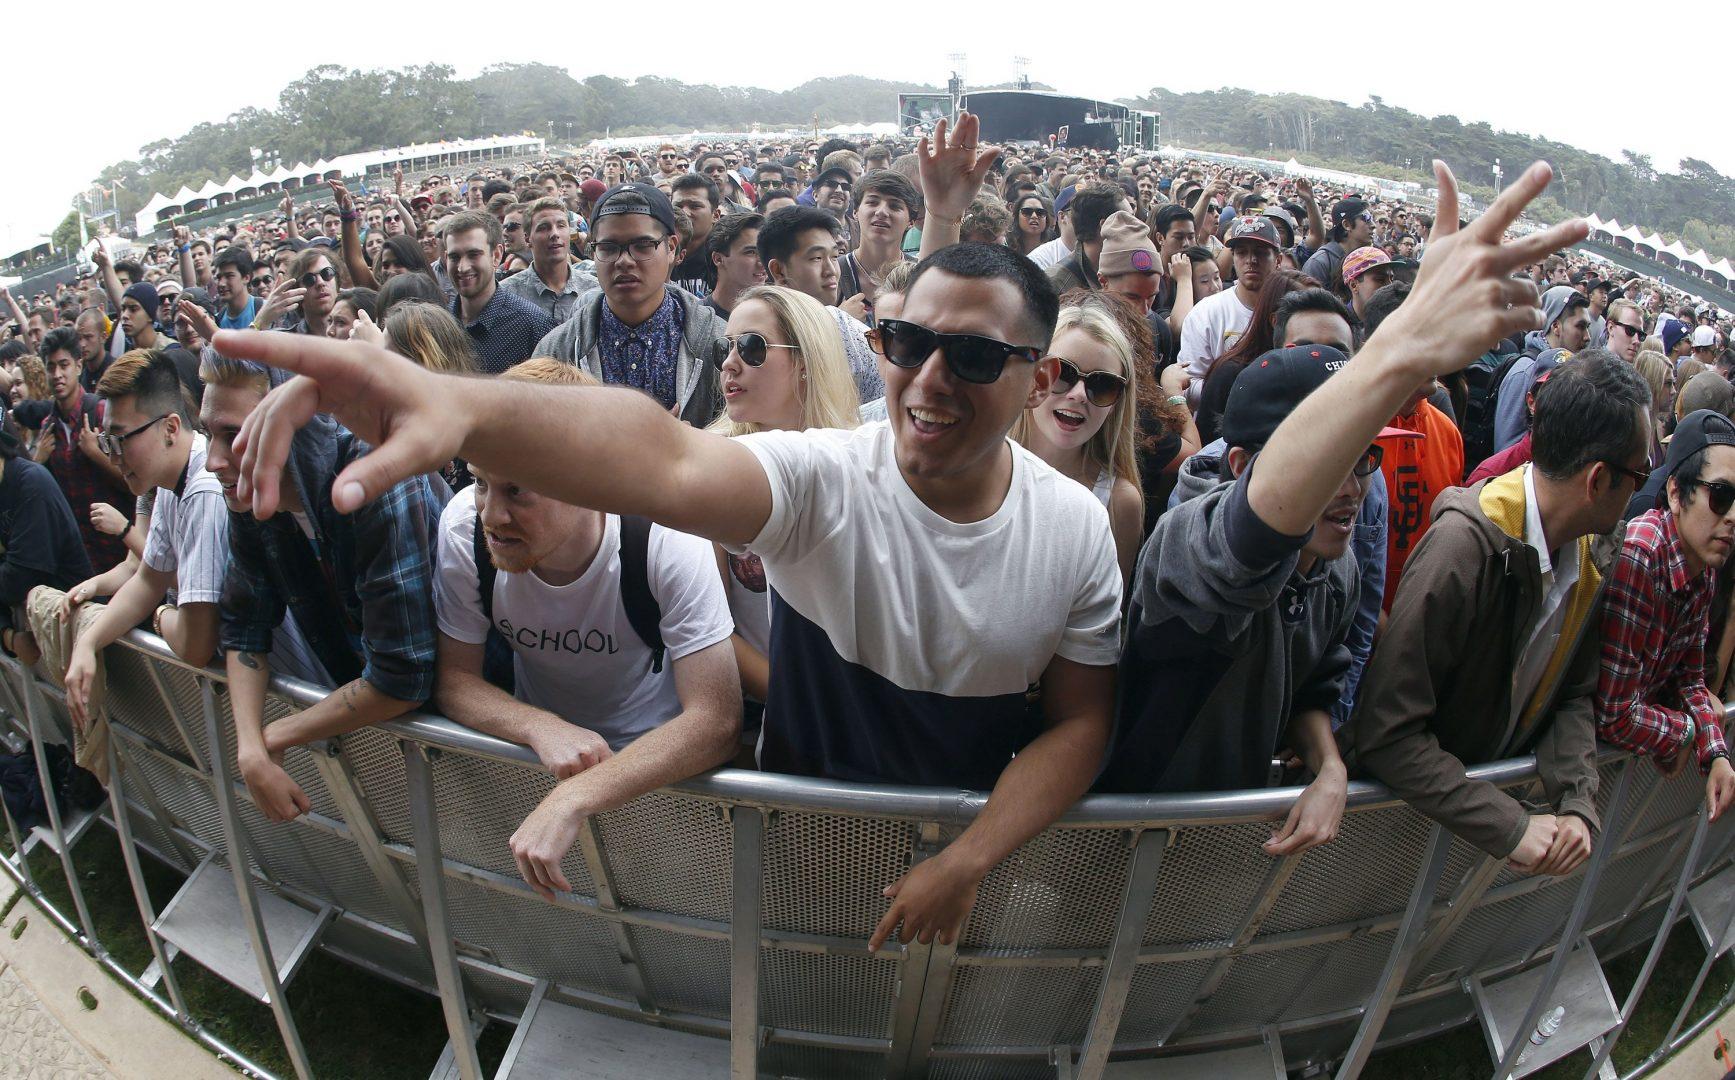 Photo by Jane Tyska / Bay Area News Group / Chris Huerta, of Pasadena, Calif., center, and others belly up to the pit during day one of the Outside Lands music festival at Golden Gate Park in San Francisco on August 8, 2014.